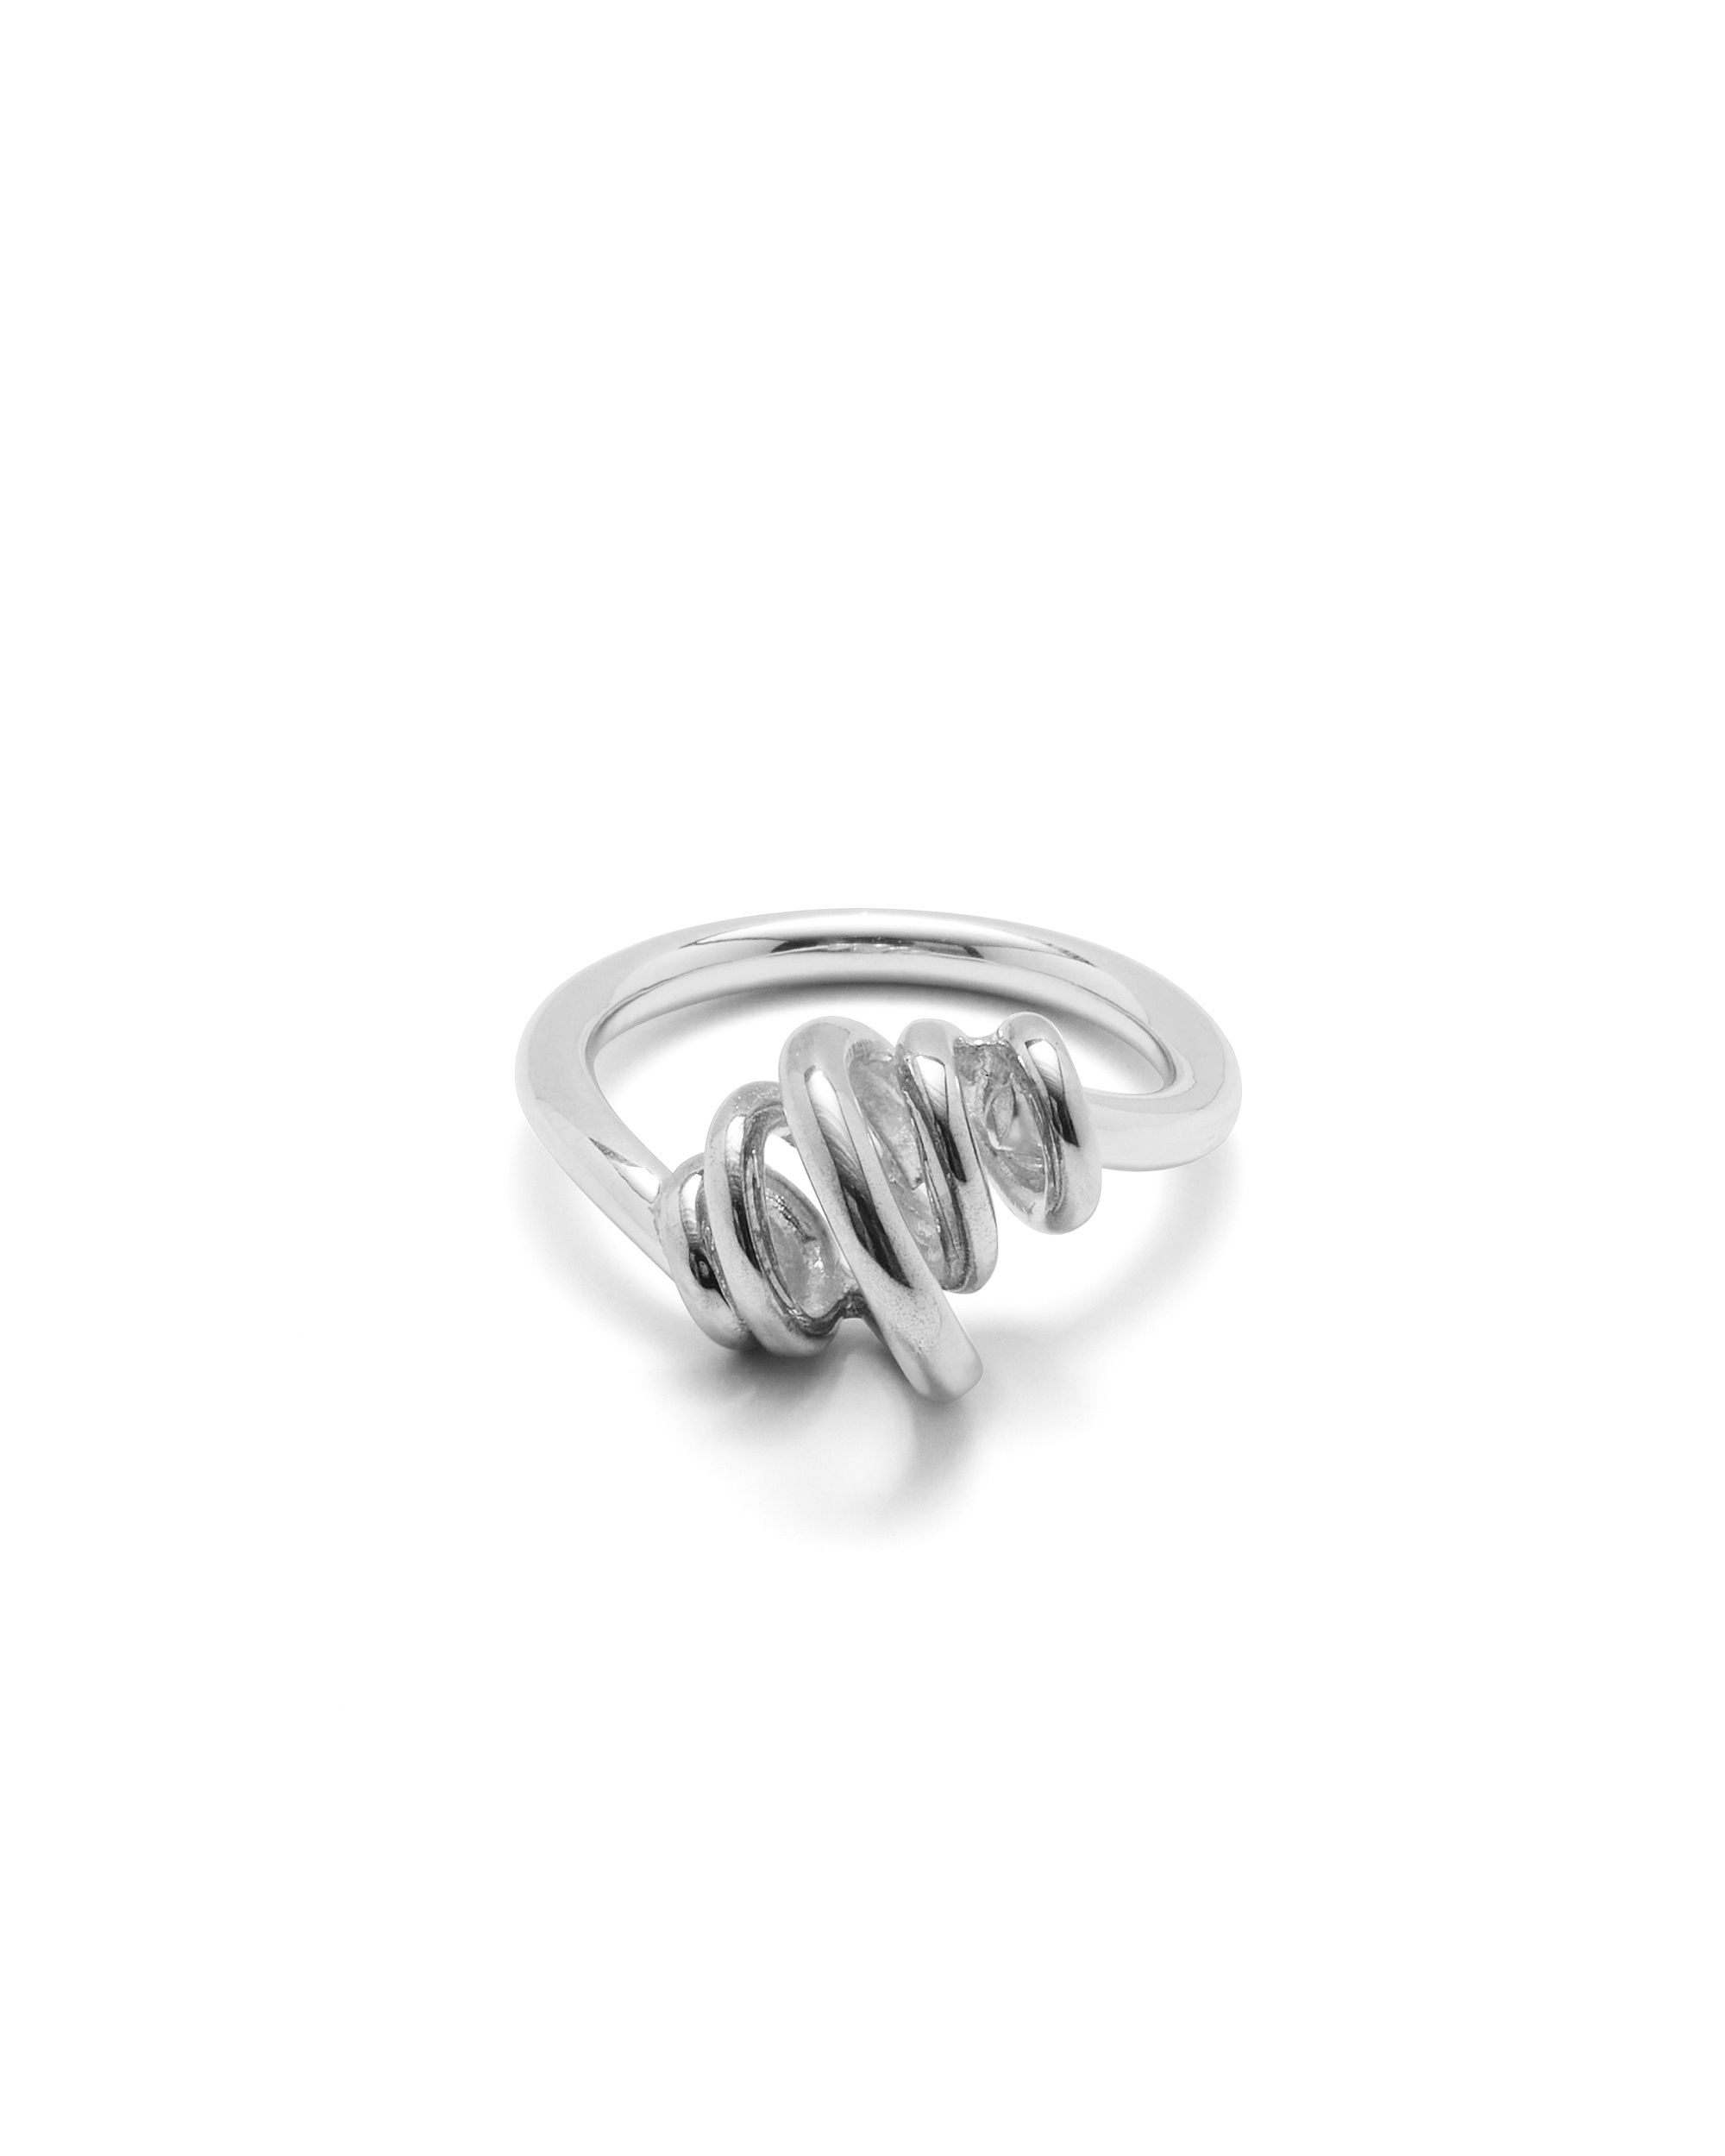 Frizzle Sizzle Ring